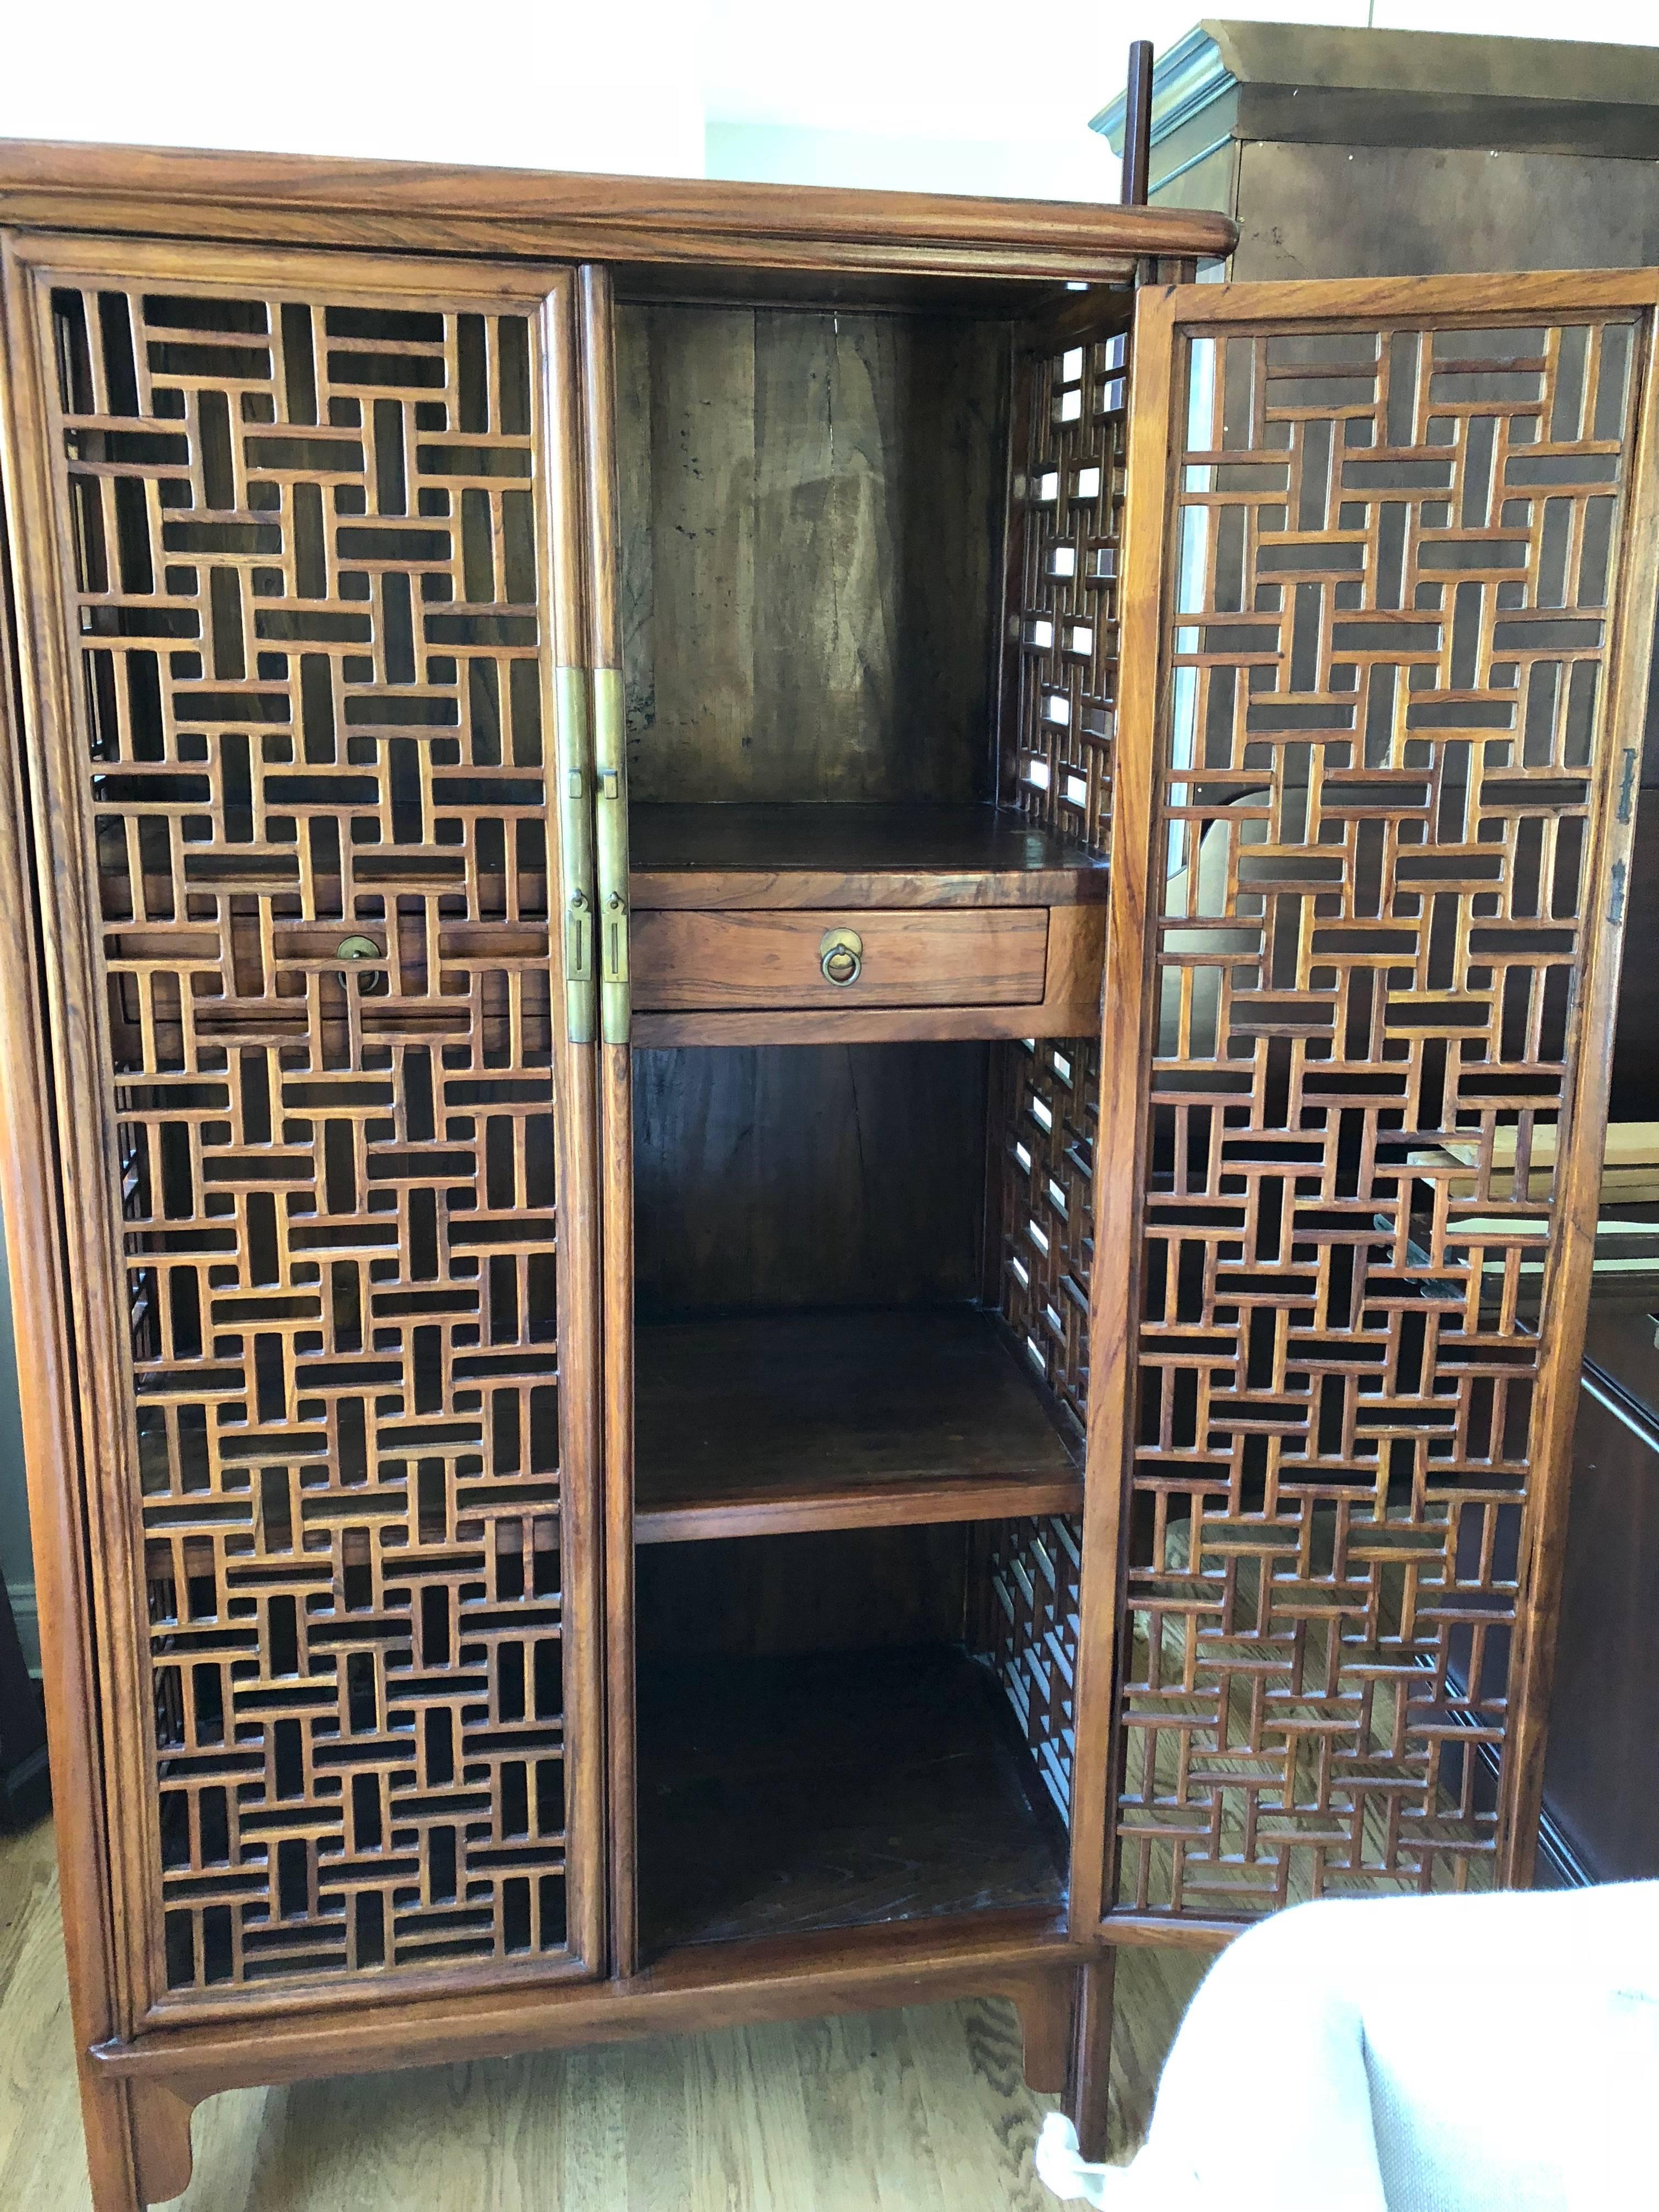 Chinese Export Rare 19th Century Quing Dynasty Hardwood Tapered Lattice Work Cabinet